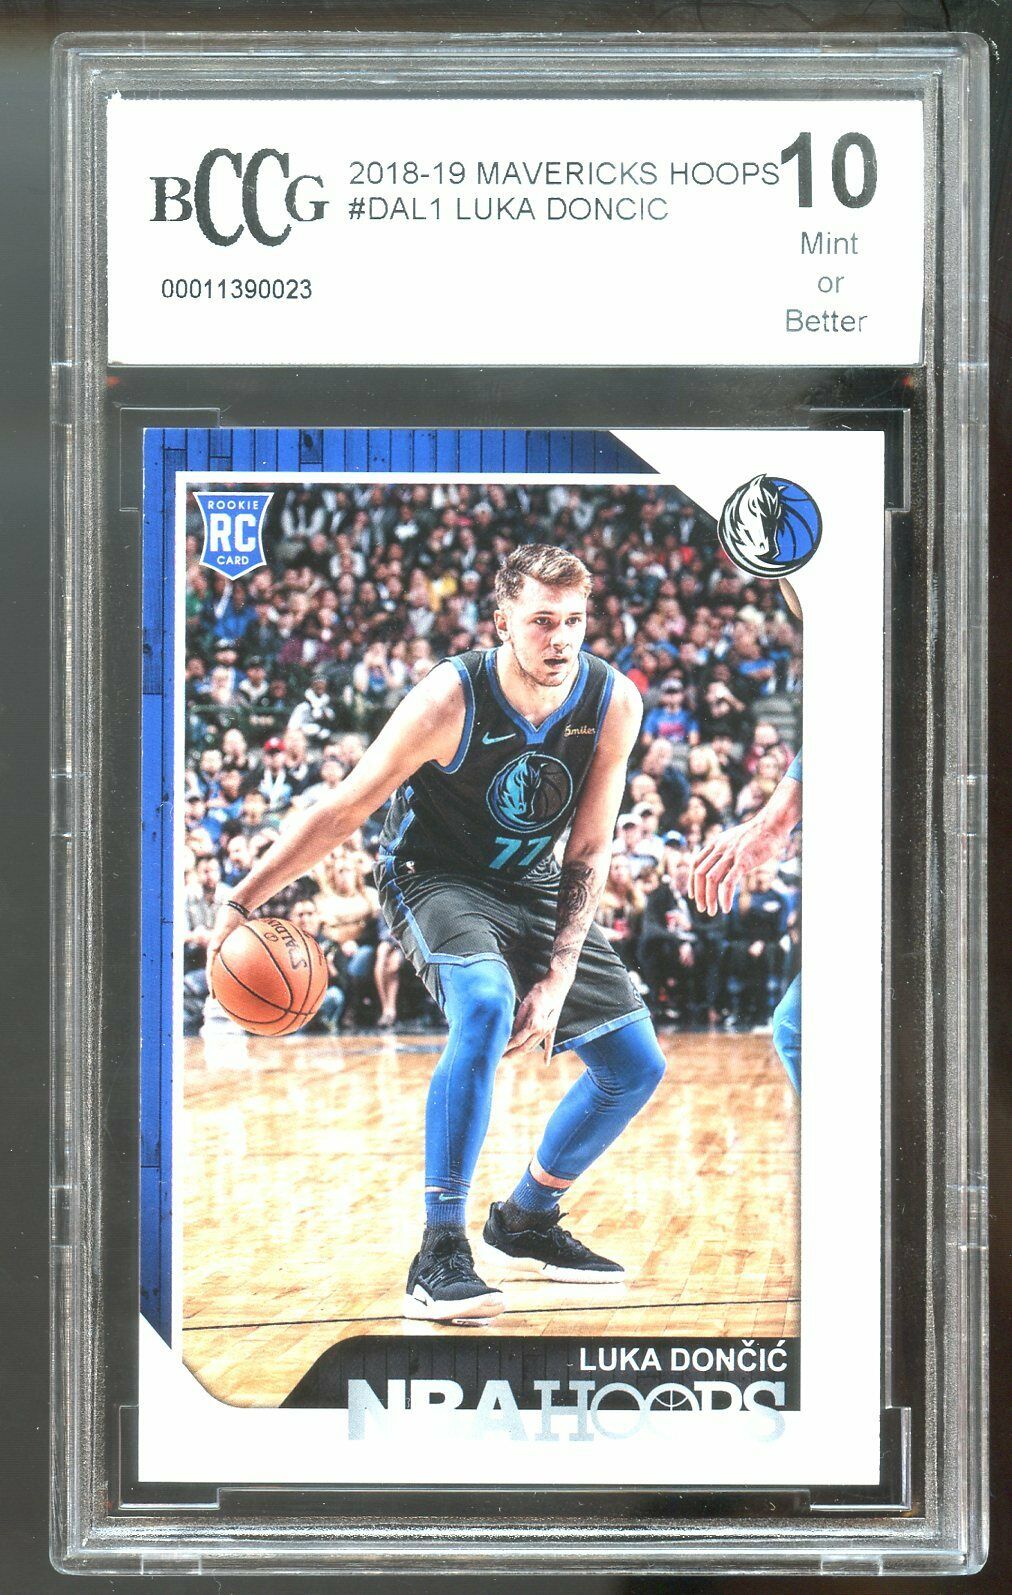 2018-19 Hoops SGA #DAL1 Luka Doncic Rookie Card Graded BCCG BGS 10 Mint+ Image 1